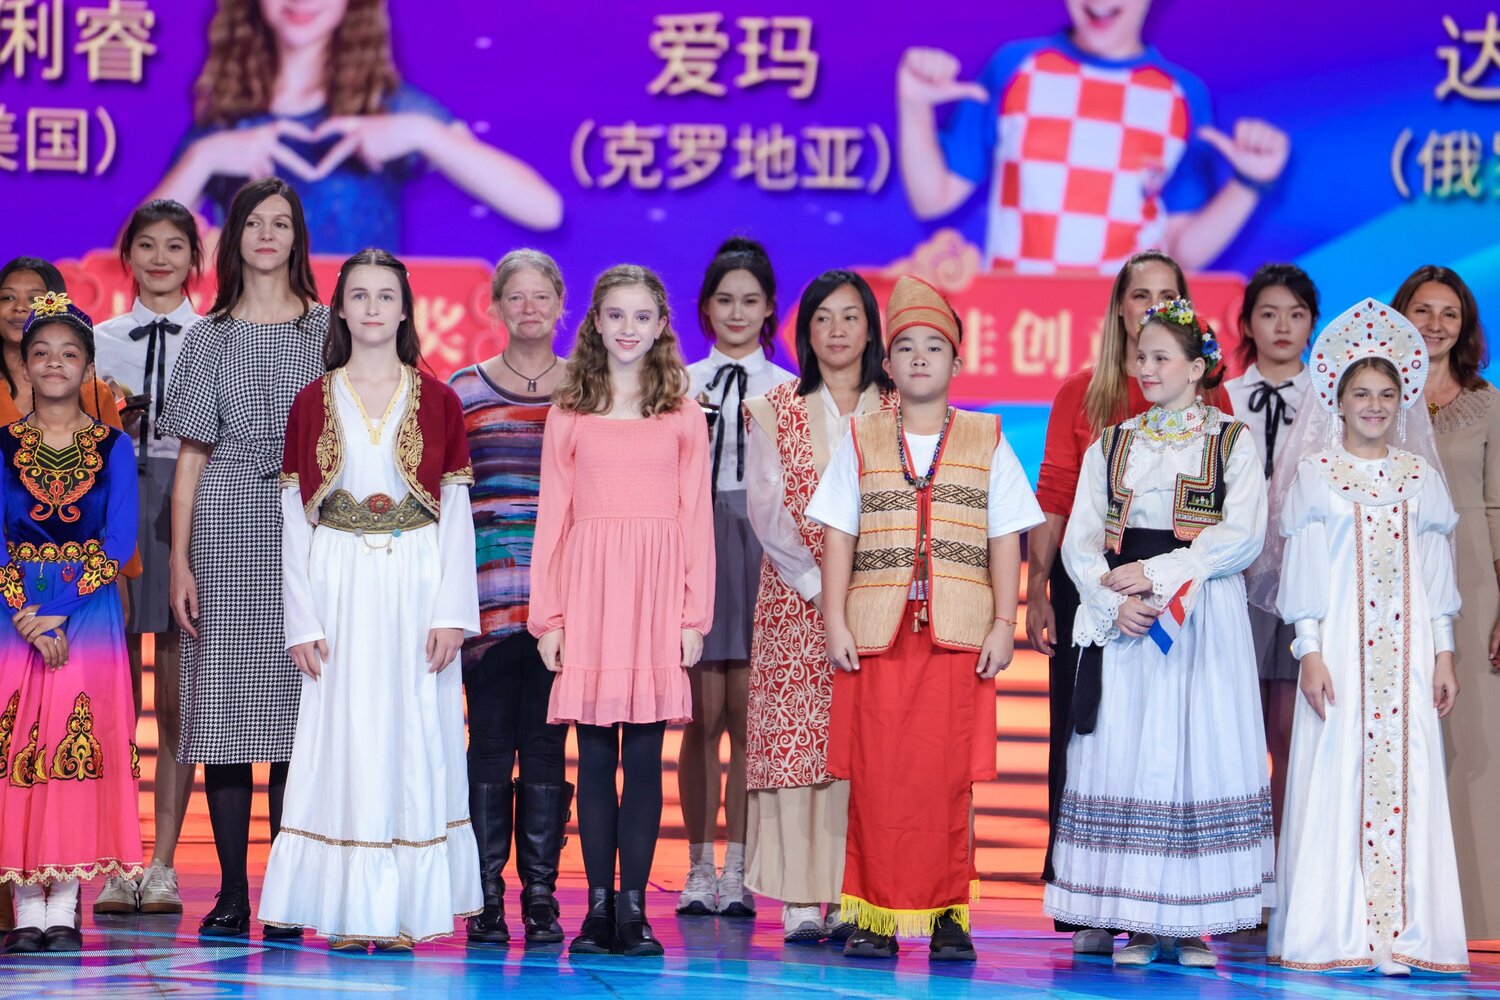 During the Chinese Bridge closing ceremony, Sage Houdek (at front in center wearing pink) and Kristi Papenfuss ( in back wearing sripes) join other guardians and contestants who were given awards. Sage earned first place among U.S. contestants, as well as an Outstanding Performance Award. (Photo submitted)